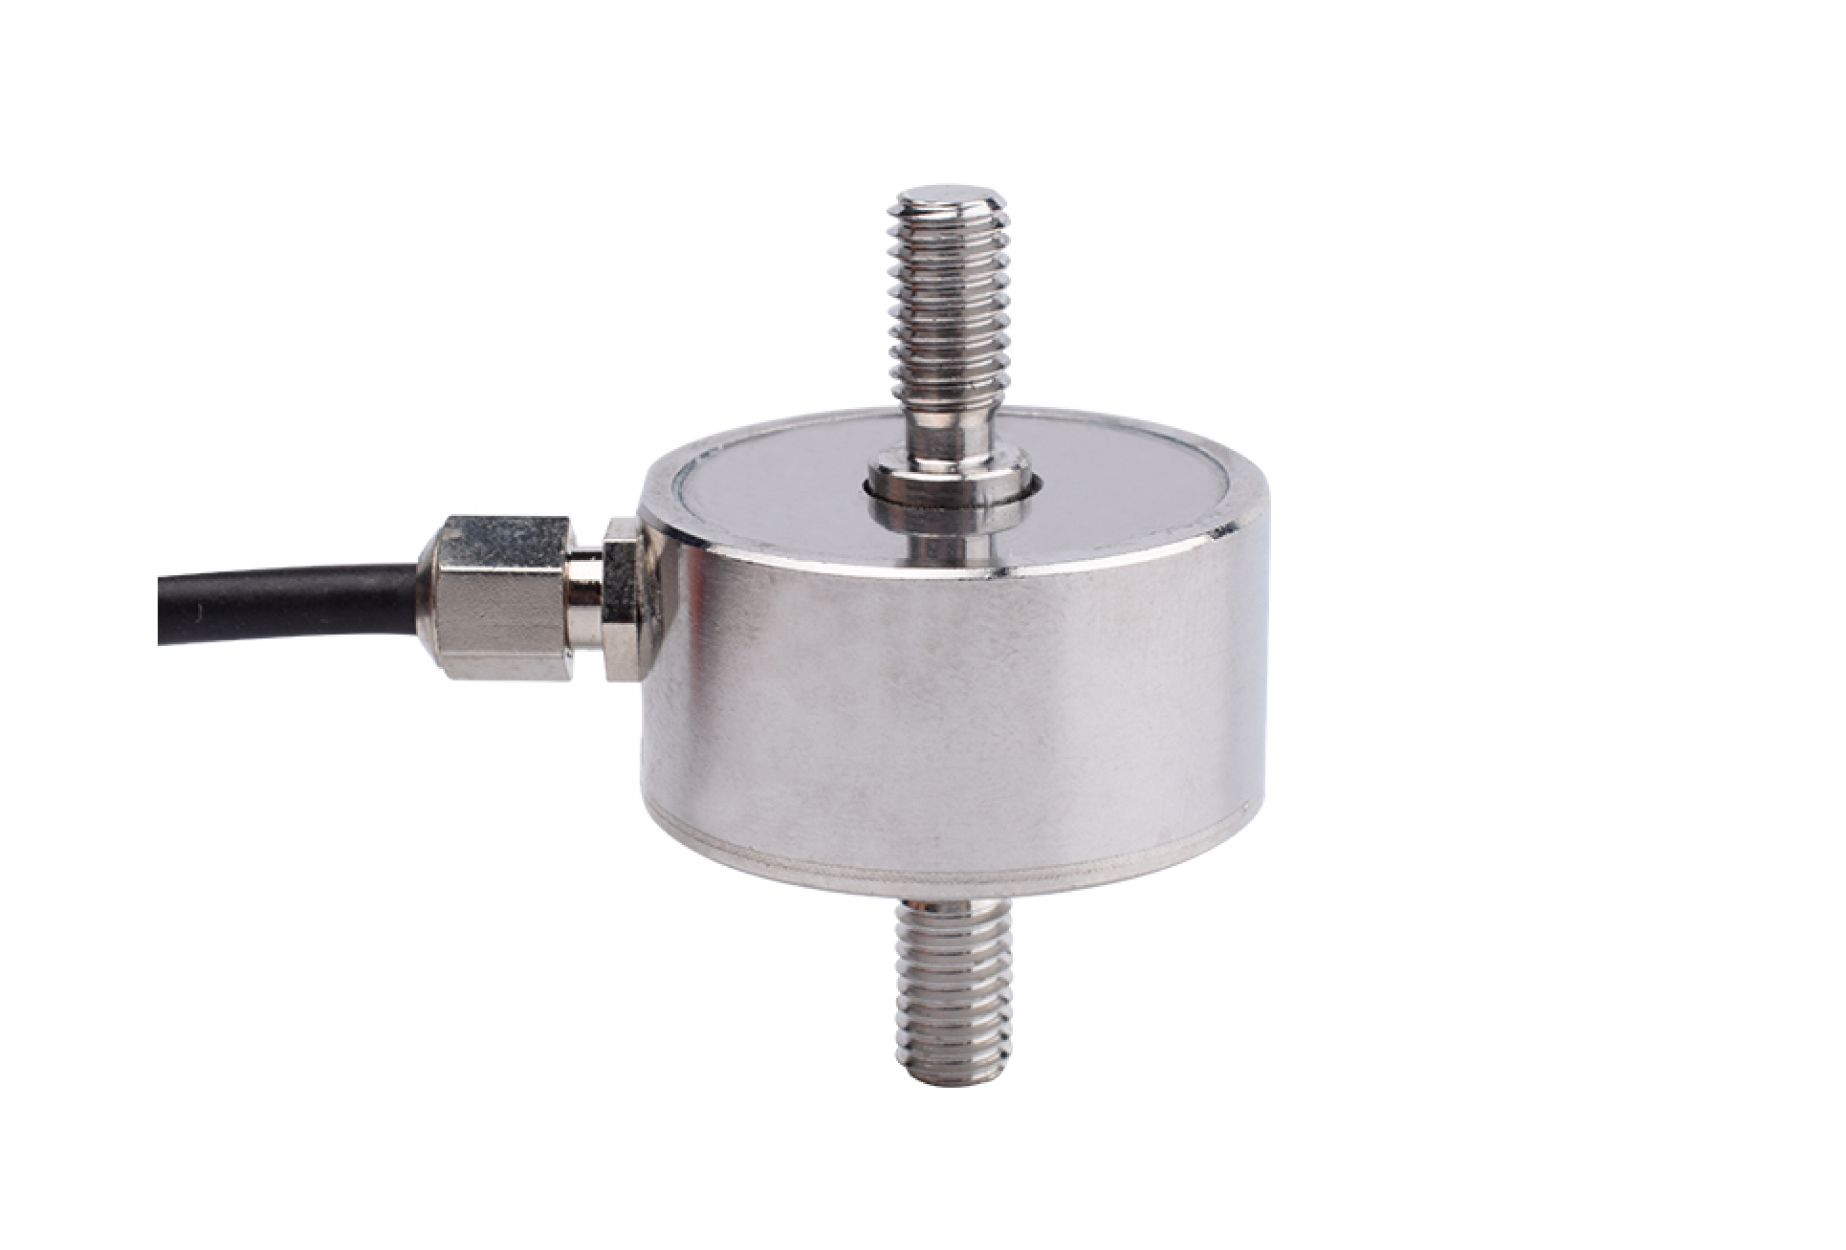 Tension and compression stainless steel load cell NF203